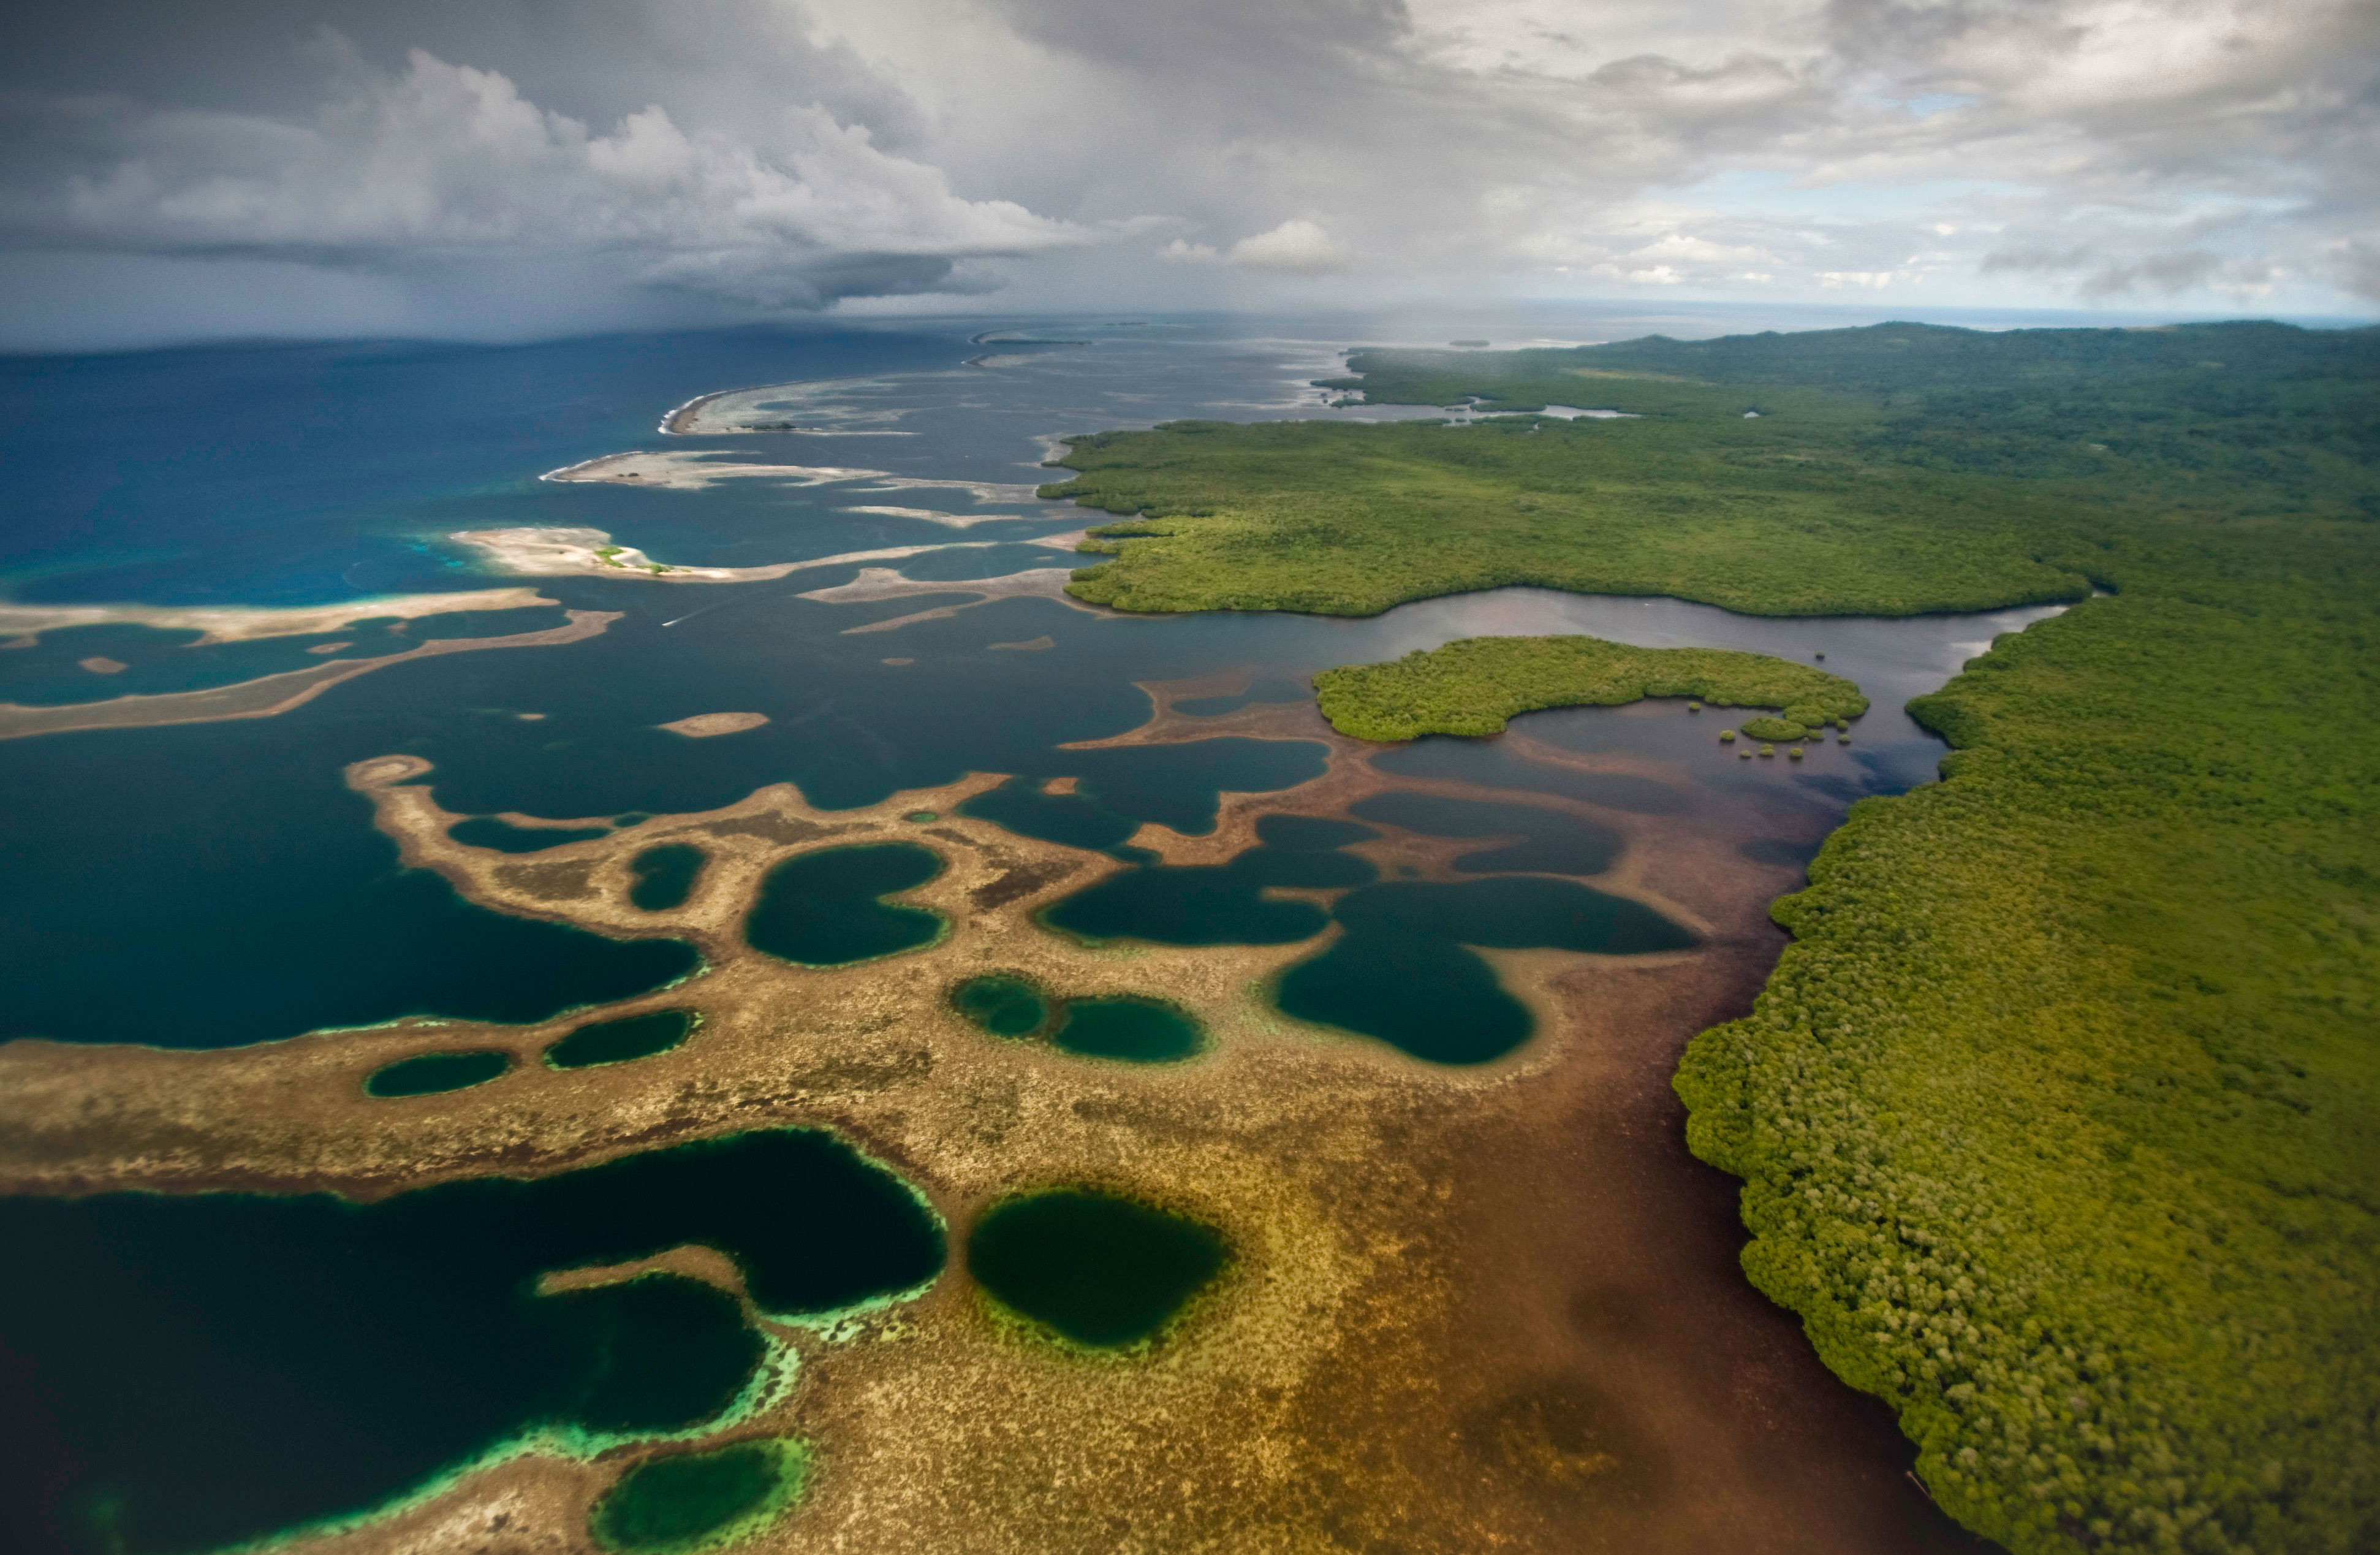 Aerial view of the Nahtik Marine Protected Area adjacent to the Enipein Mangrove Forest Reserve, Pohnpei, Micronesia.